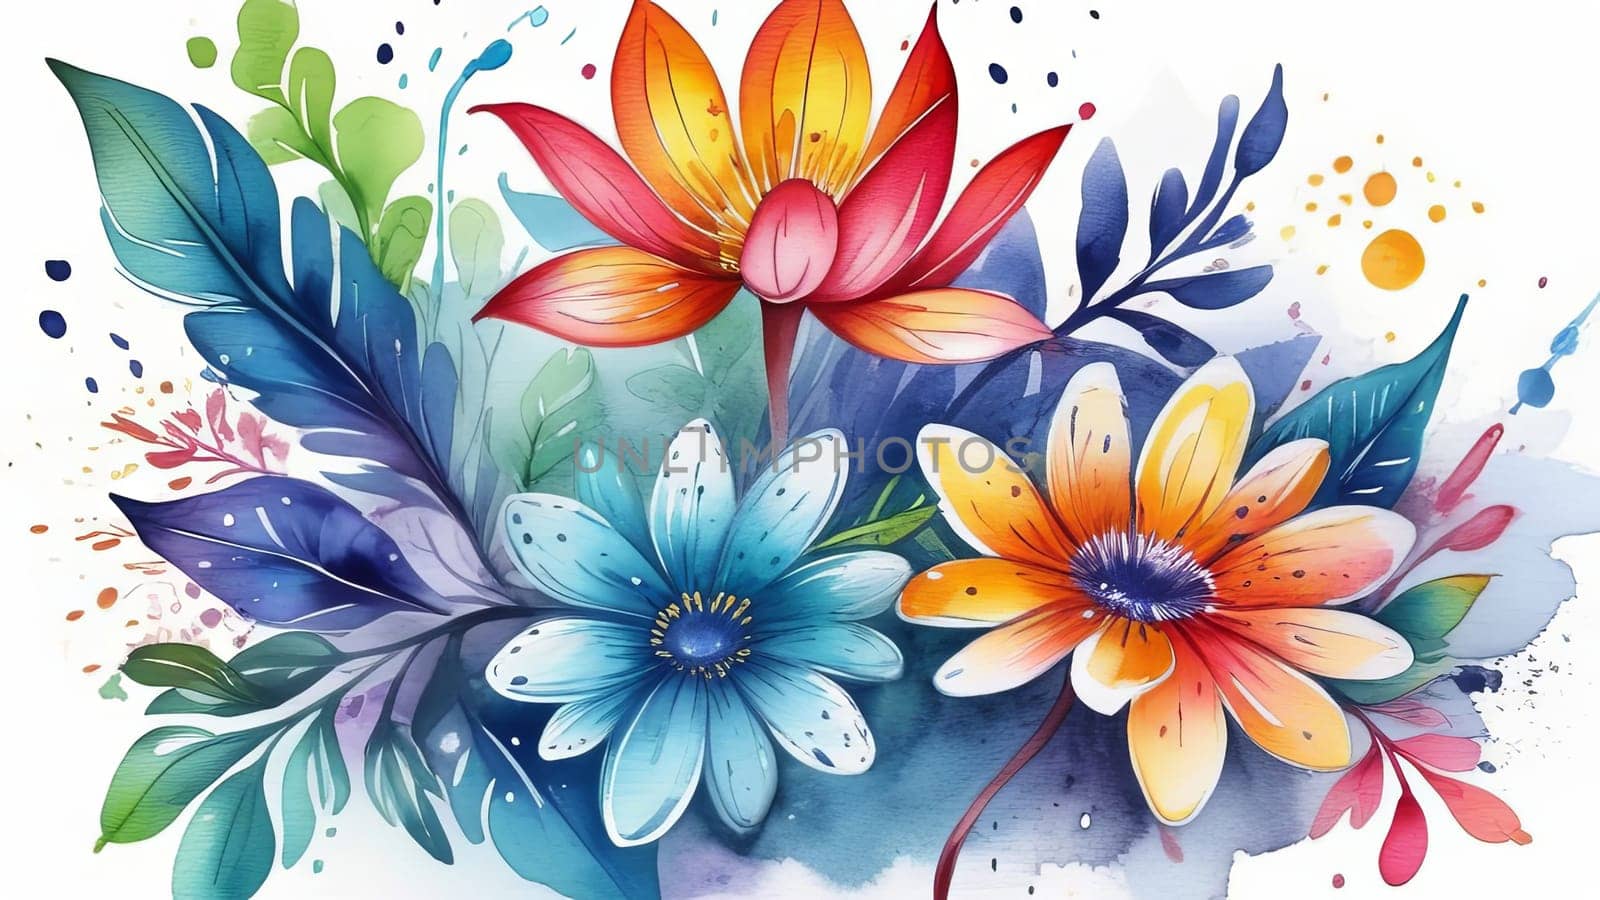 Vibrant floral painting set against white backdrop. For meditation apps, cover of book about spiritual growth, designs for yoga studios, spa salons, illustration for articles on inner peace, harmony